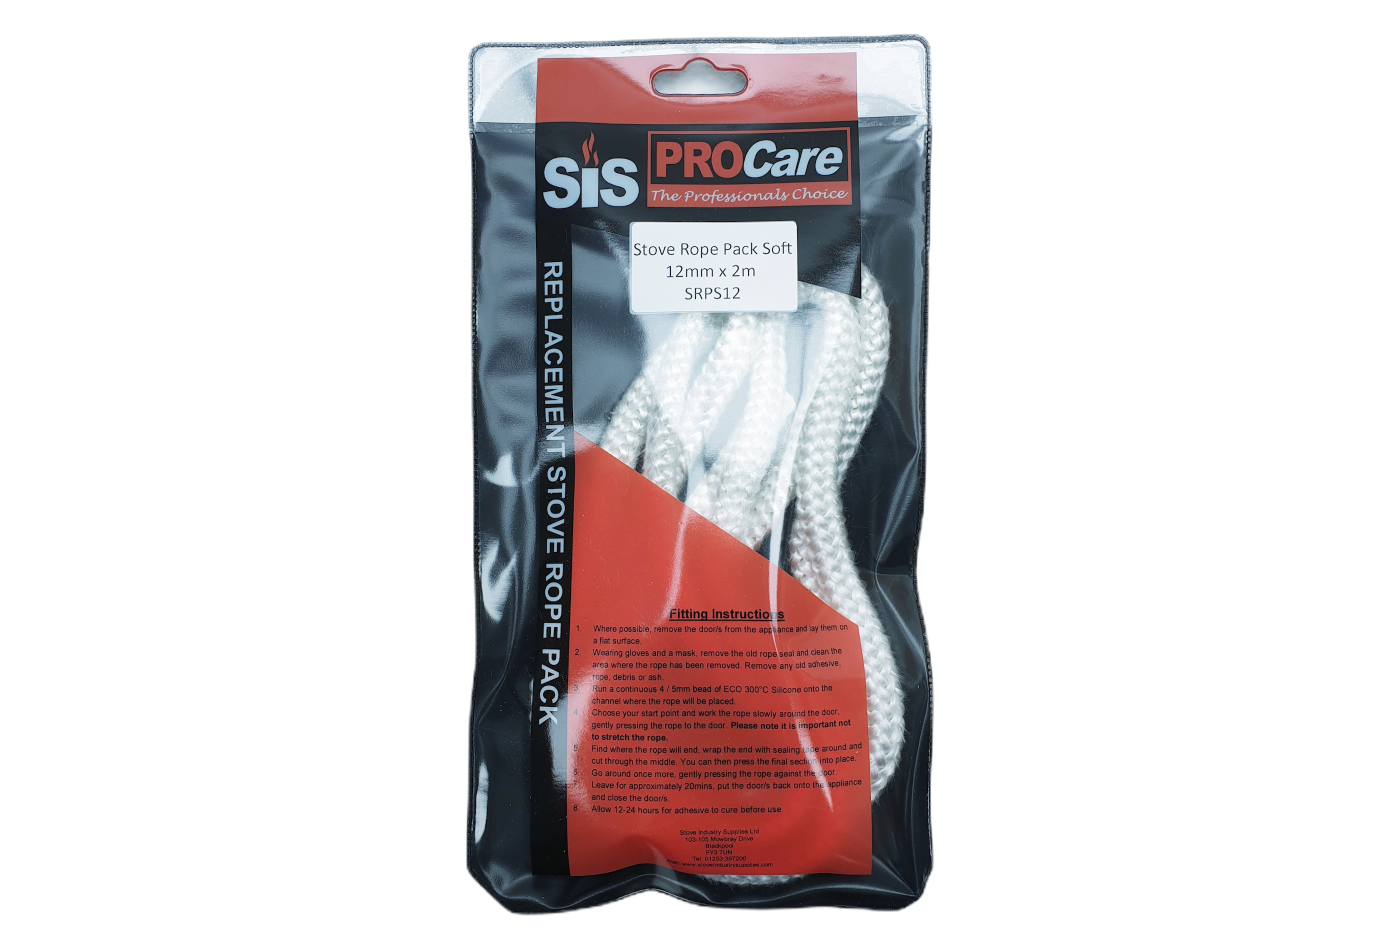 SiS Procare White 12 milimetre x 2 metre Soft Stove Rope Pack - product code SRPS12